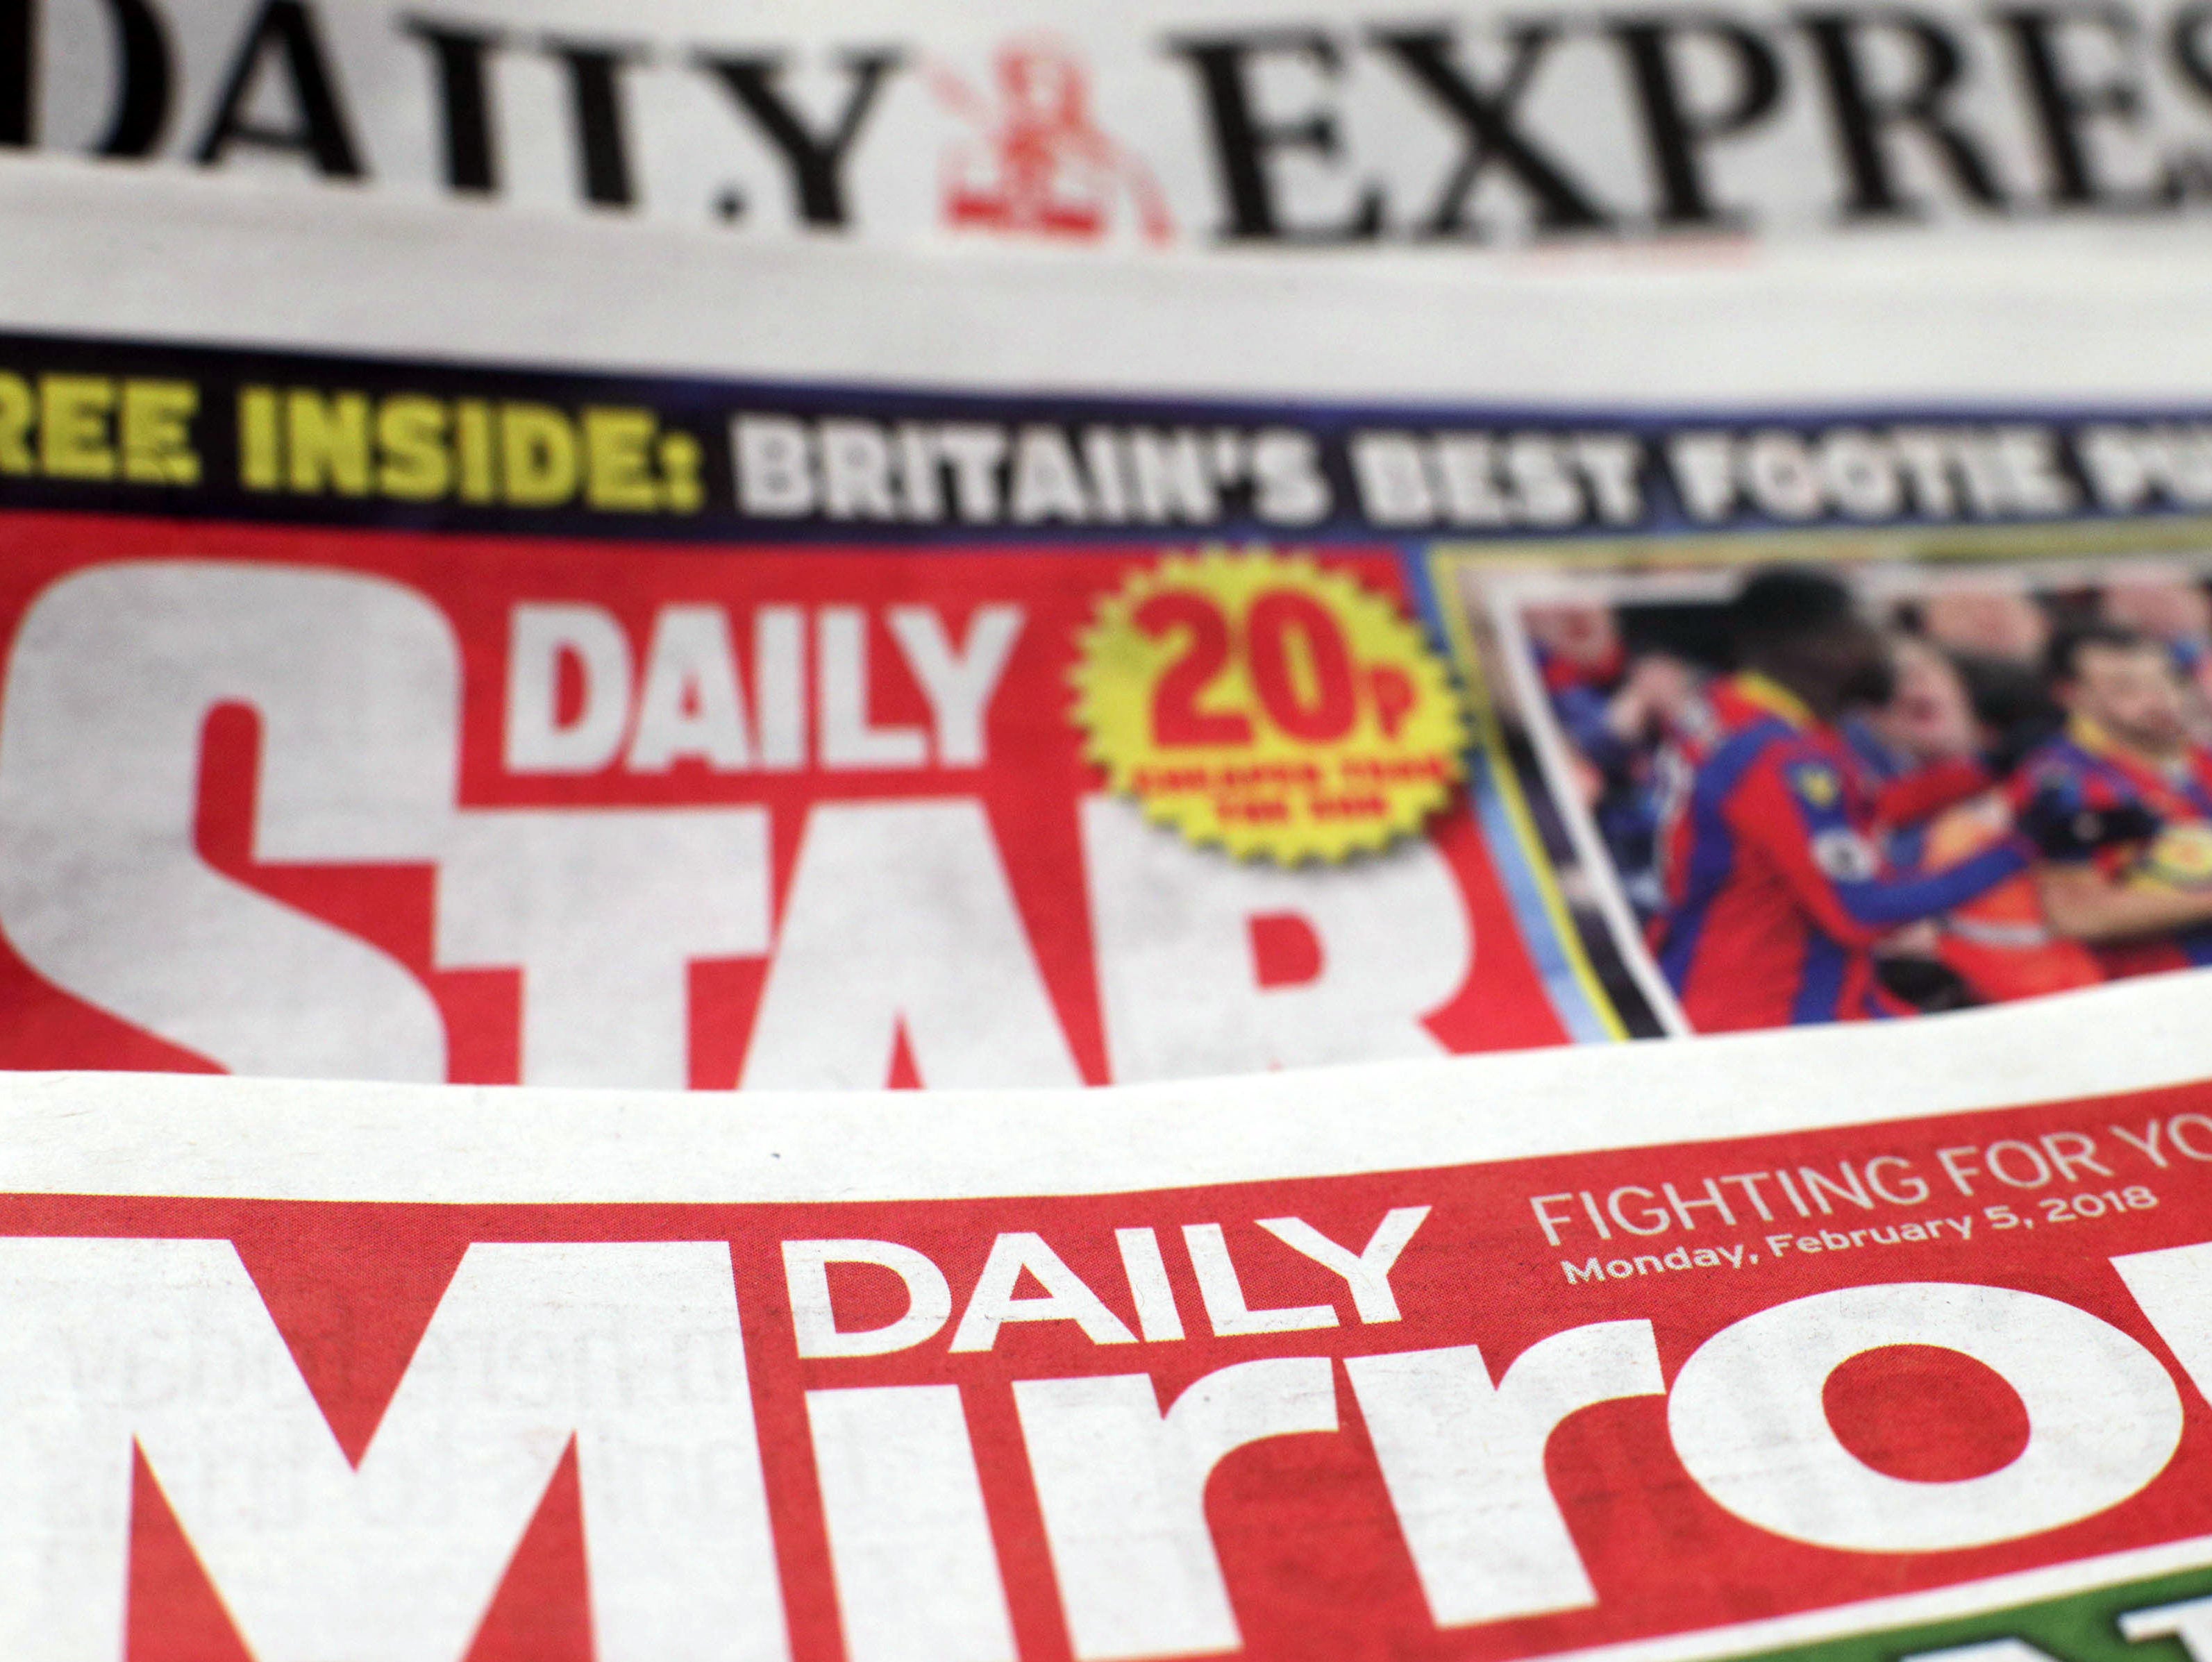 Culture Secretary 'minded to' intervene in Trinity Mirror takeover of Express Newspapers